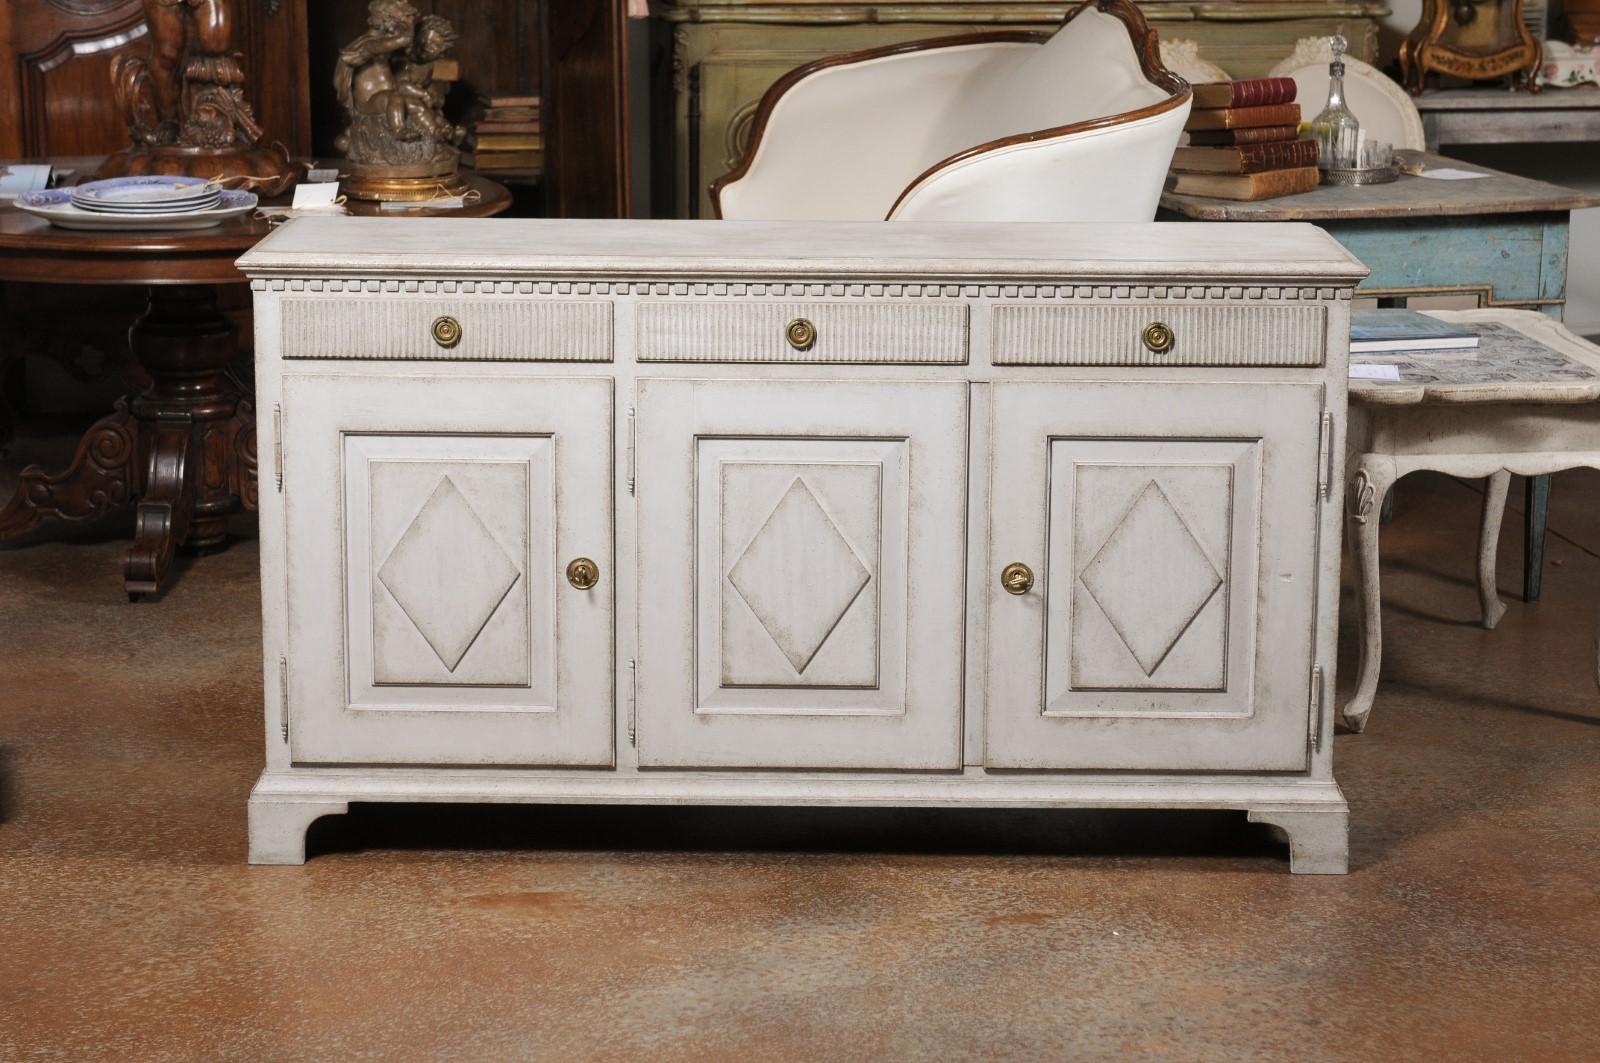 A Scandinavian late Gustavian style painted wood sideboard from the 20th century, with three drawers over three doors and diamond motifs. Created in Scandinavia during the 20th century, this sideboard features a rectangular top sitting above a